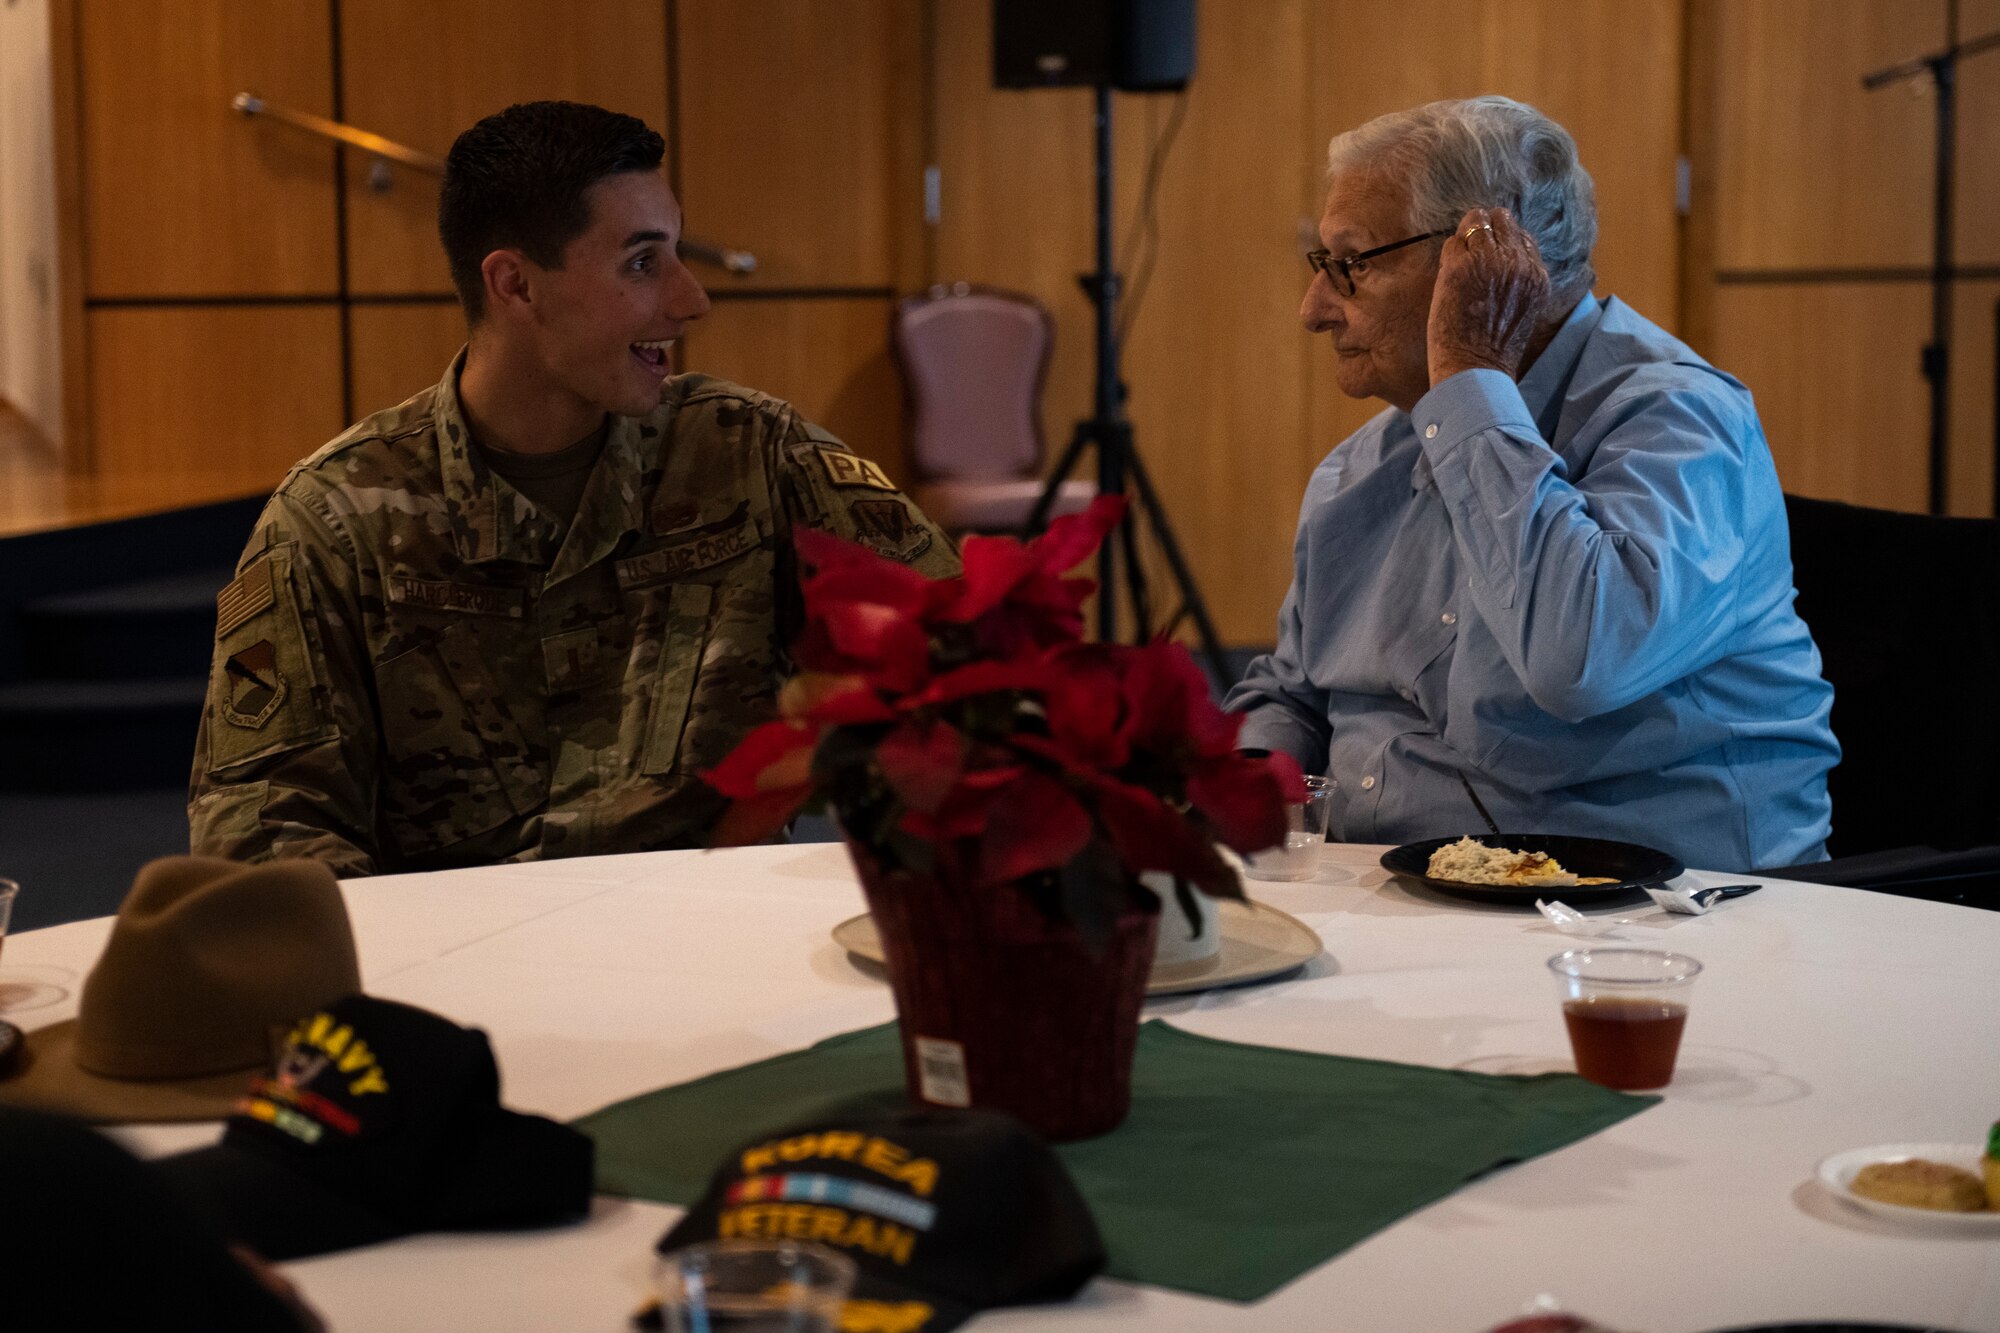 U.S. Air Force 2nd Lt. Joseph Harclerode, 325th Fighter Wing public affairs officer, talks with a senior citizen veteran at Tyndall Air Force Base, Florida, Dec. 9, 2022.